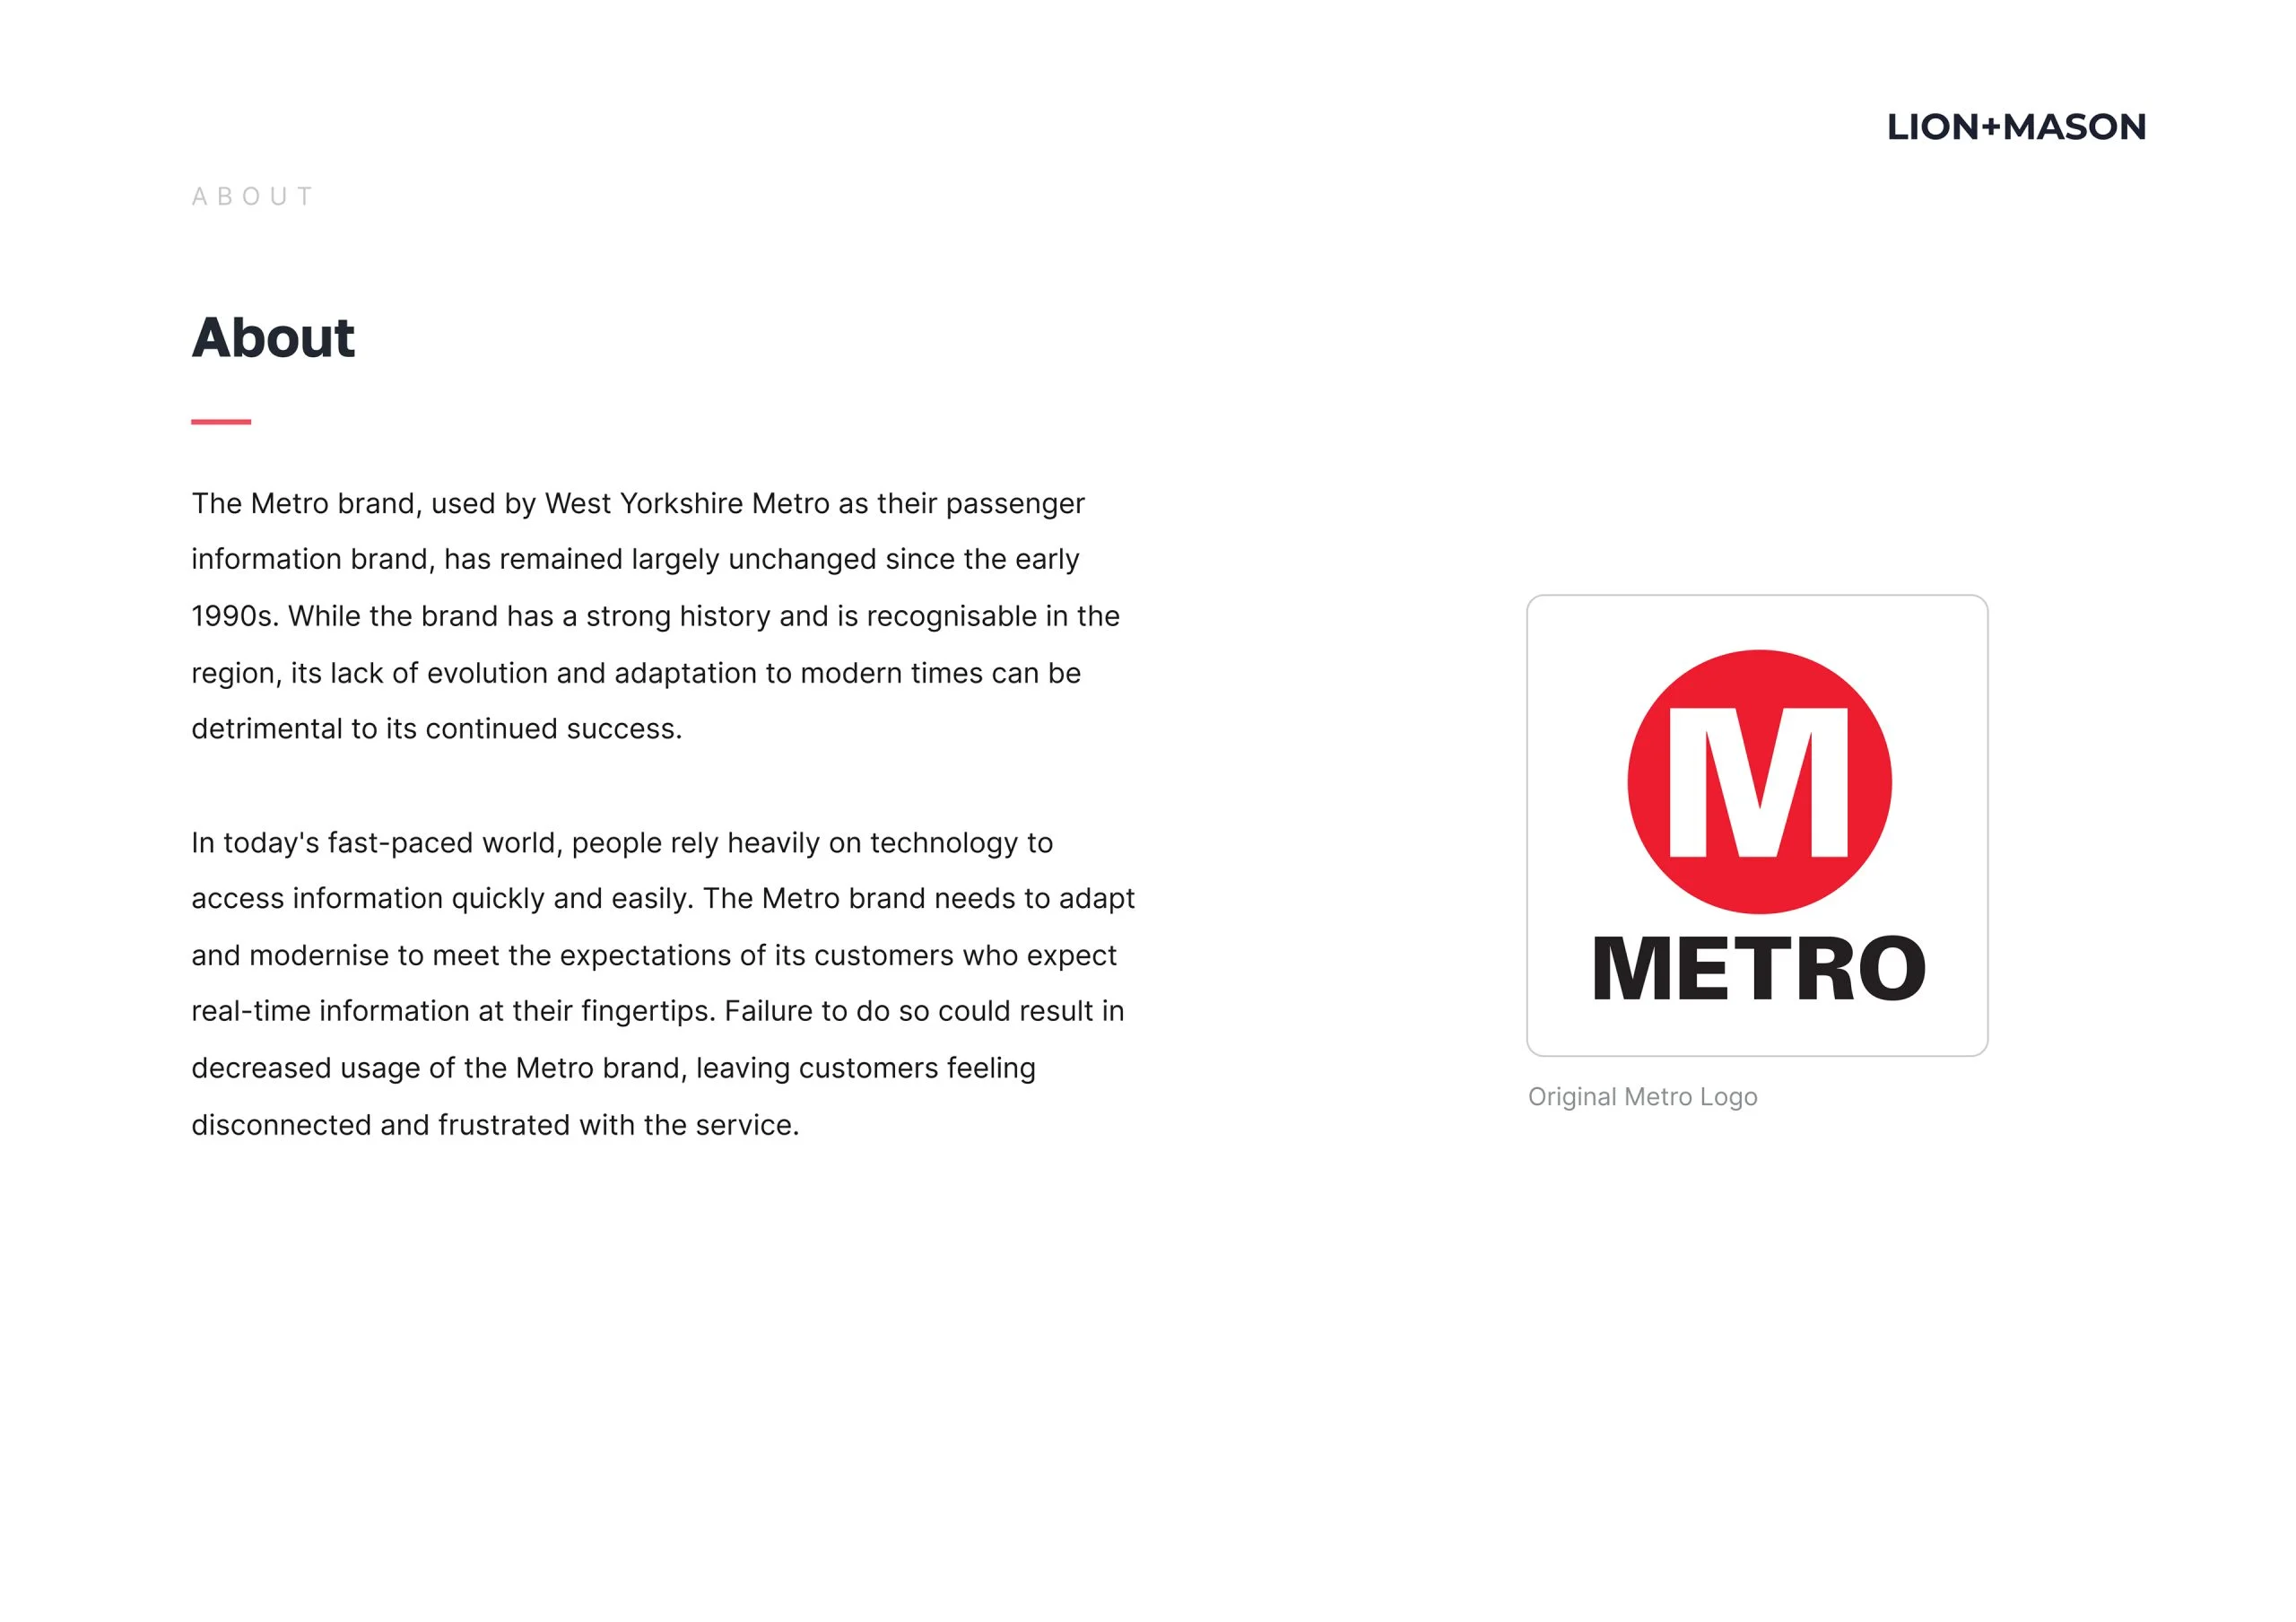 How can West Yorkshire Metro shift towards a user-centered approach? - Part 1 The Brand 7